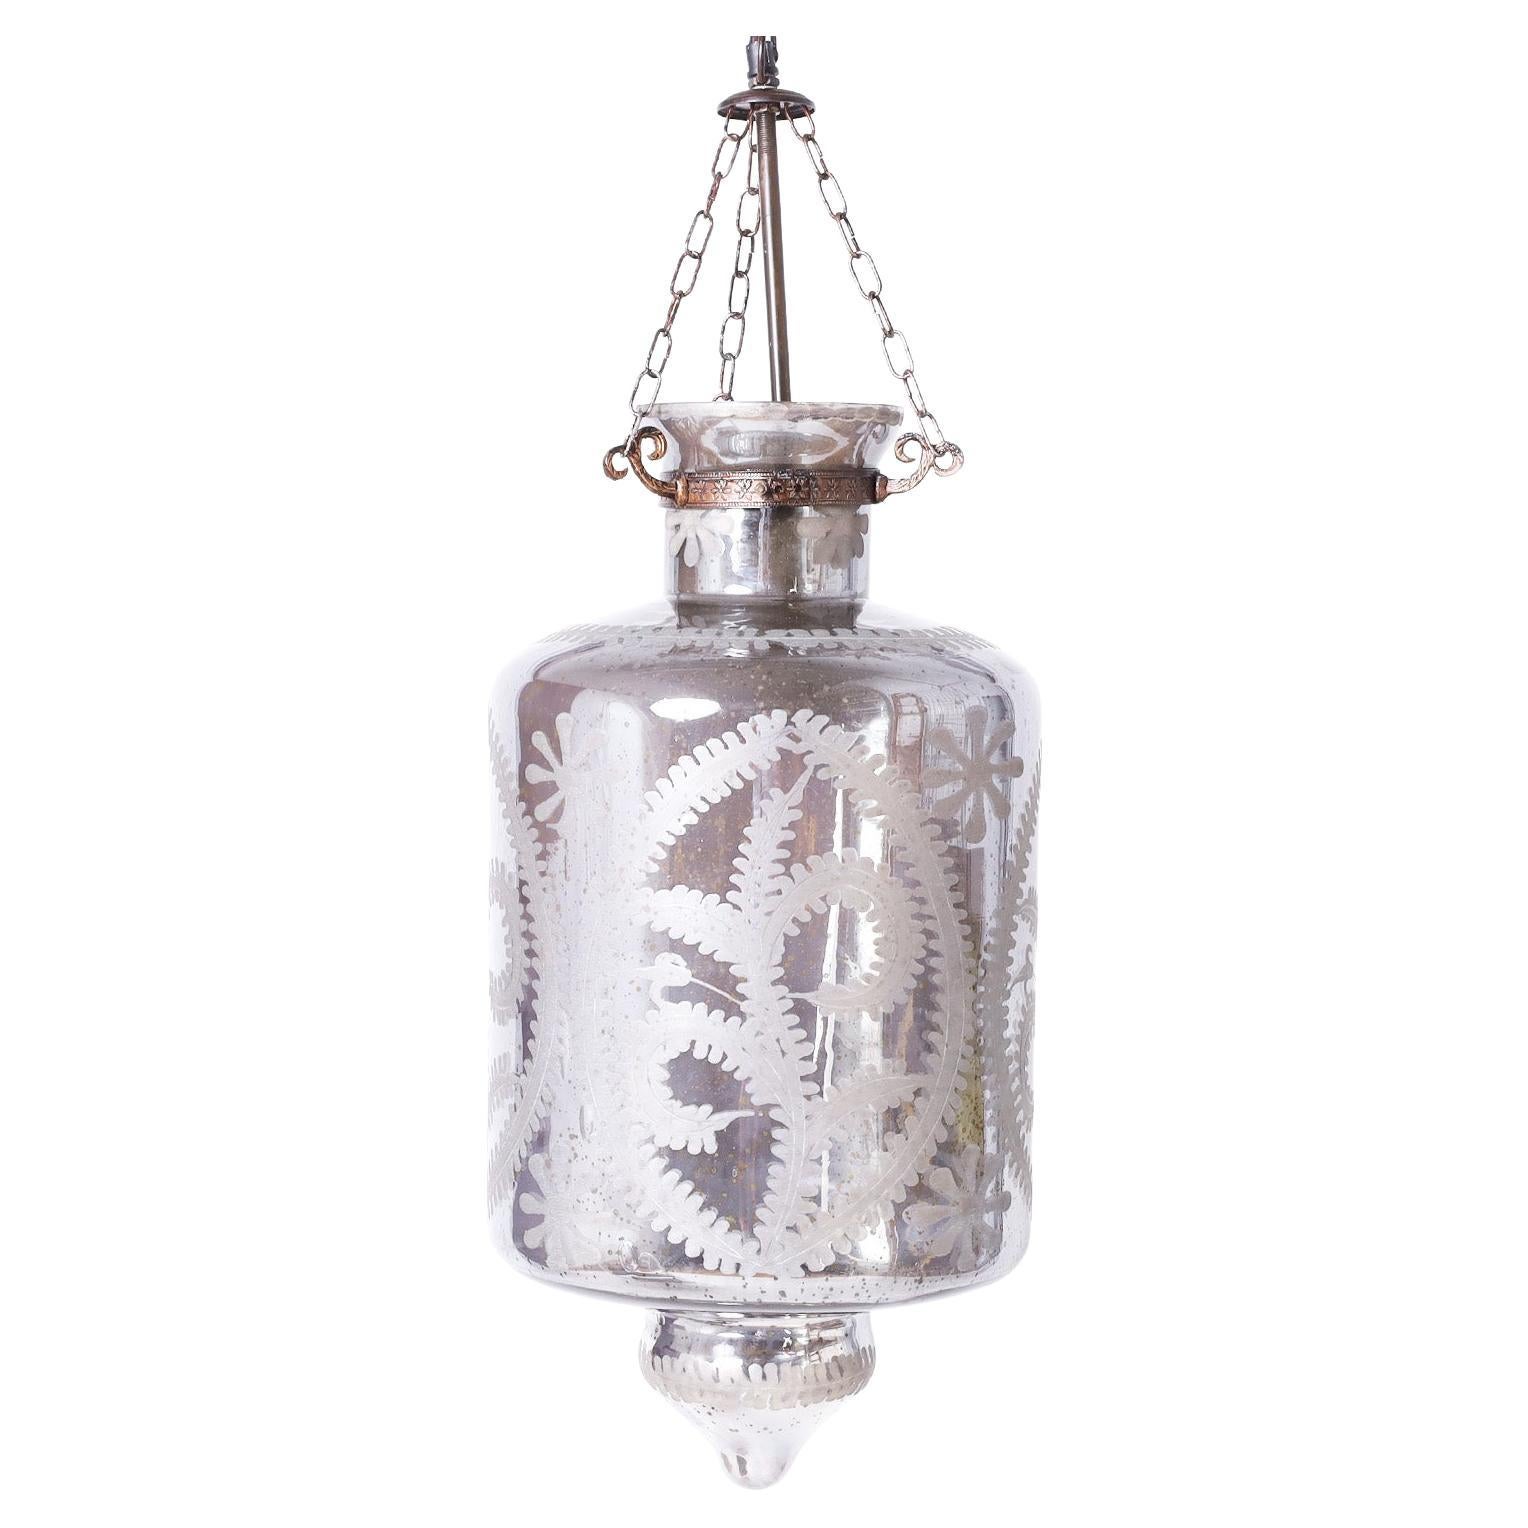 Antique Etched and Silvered Lantern or Pendant